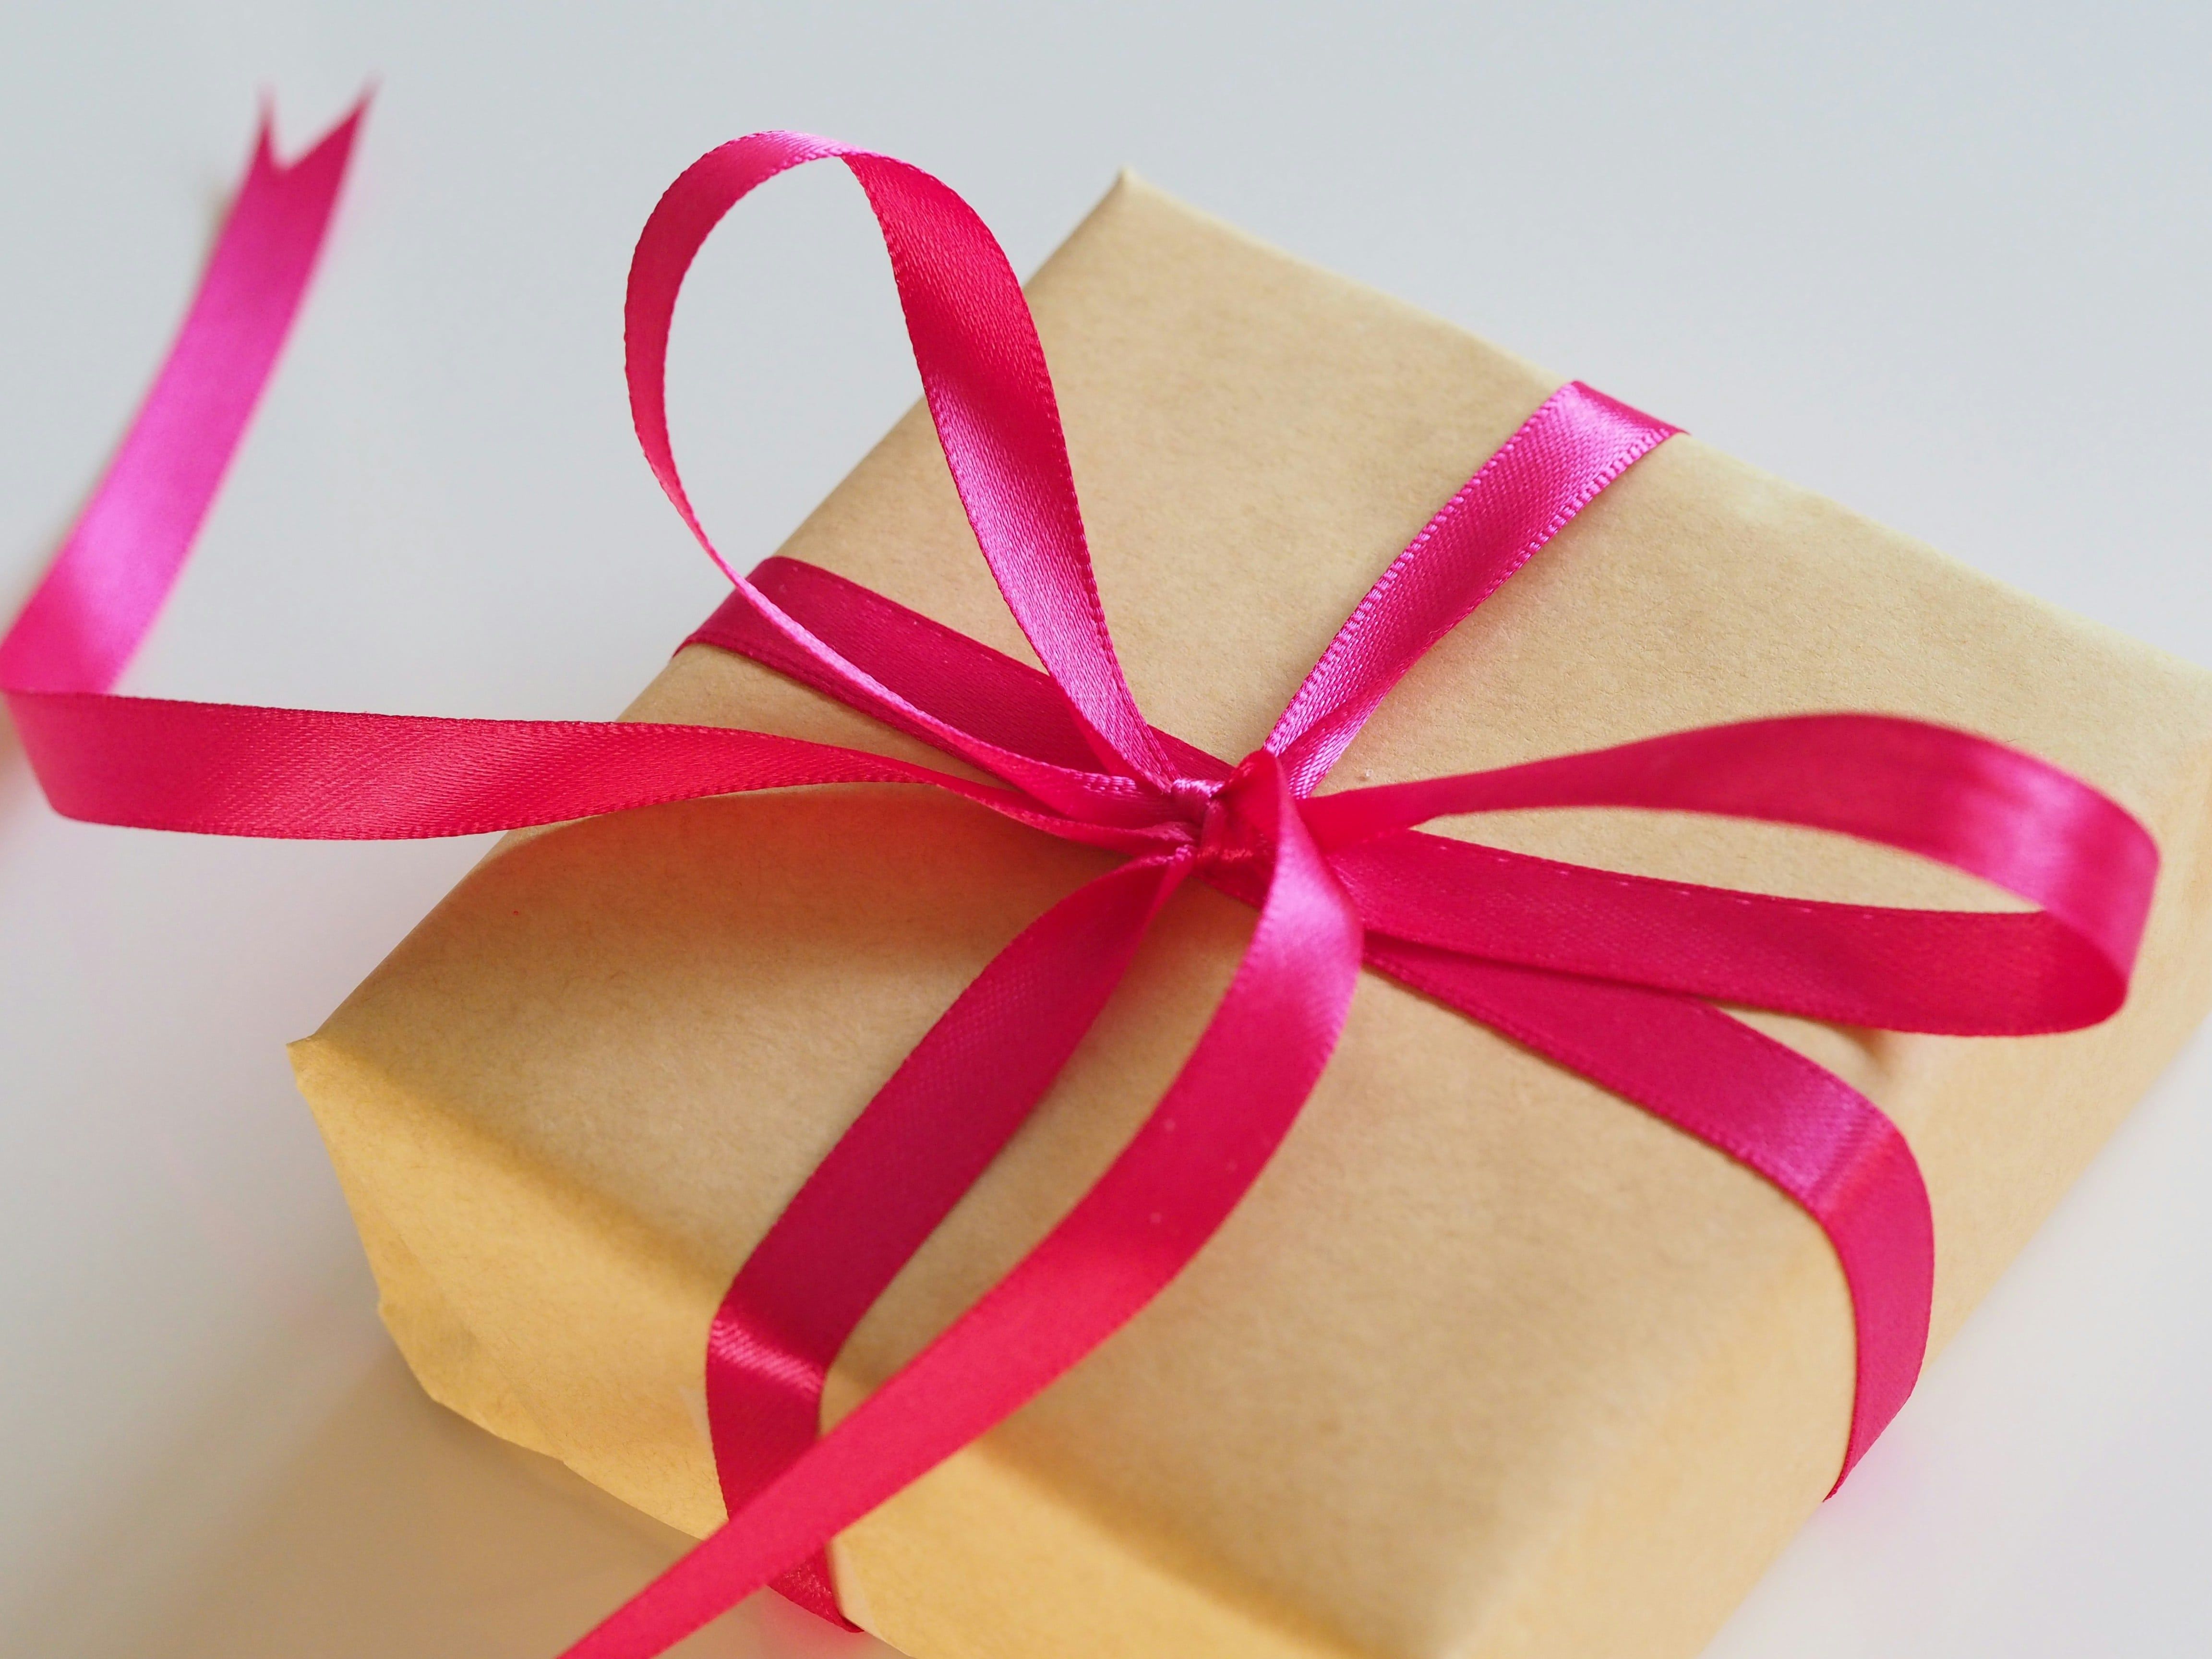 gift wrapped with a pink ribbon - corporate gifting business